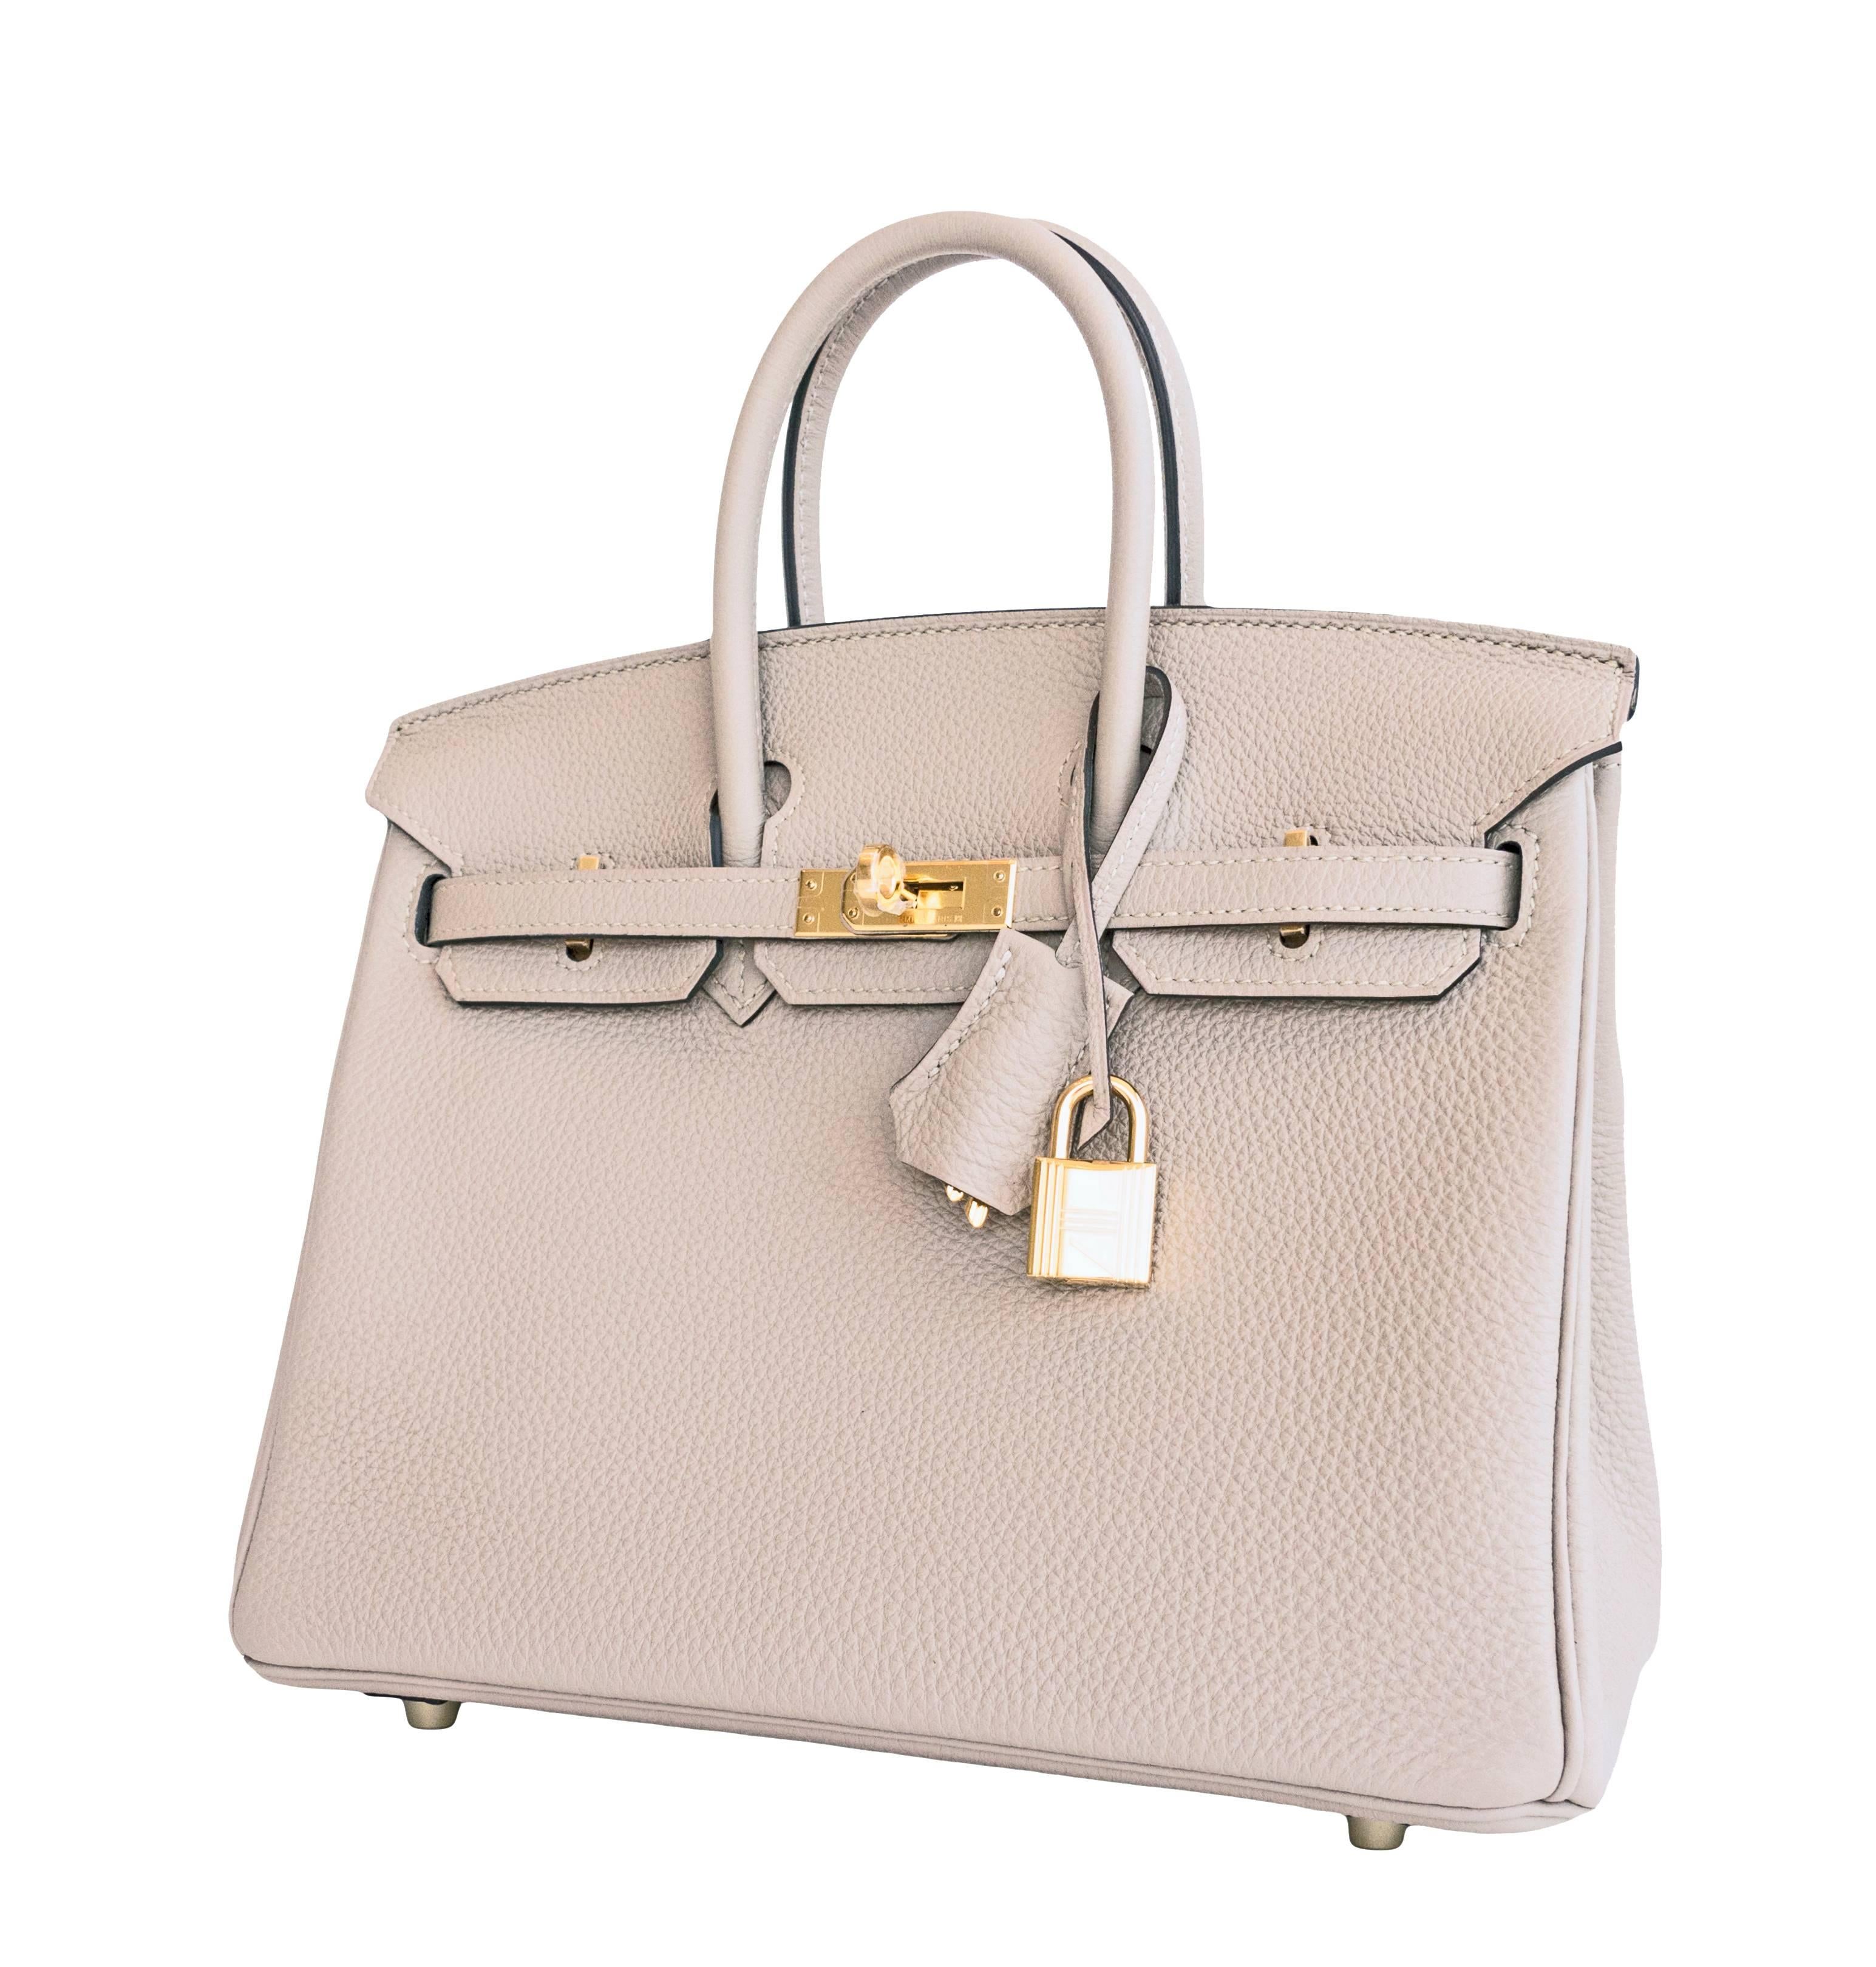 Hermes Gris Tourterelle Baby Birkin Dove Grey 25cm Togo Gold GHW Jewel 
Store Fresh. Pristine condition. 
Perfect gift! Comes full set with keys, lock, clochette, a sleeper for the bag, rain protector, and Hermes box. 
Gris Tourterelle is